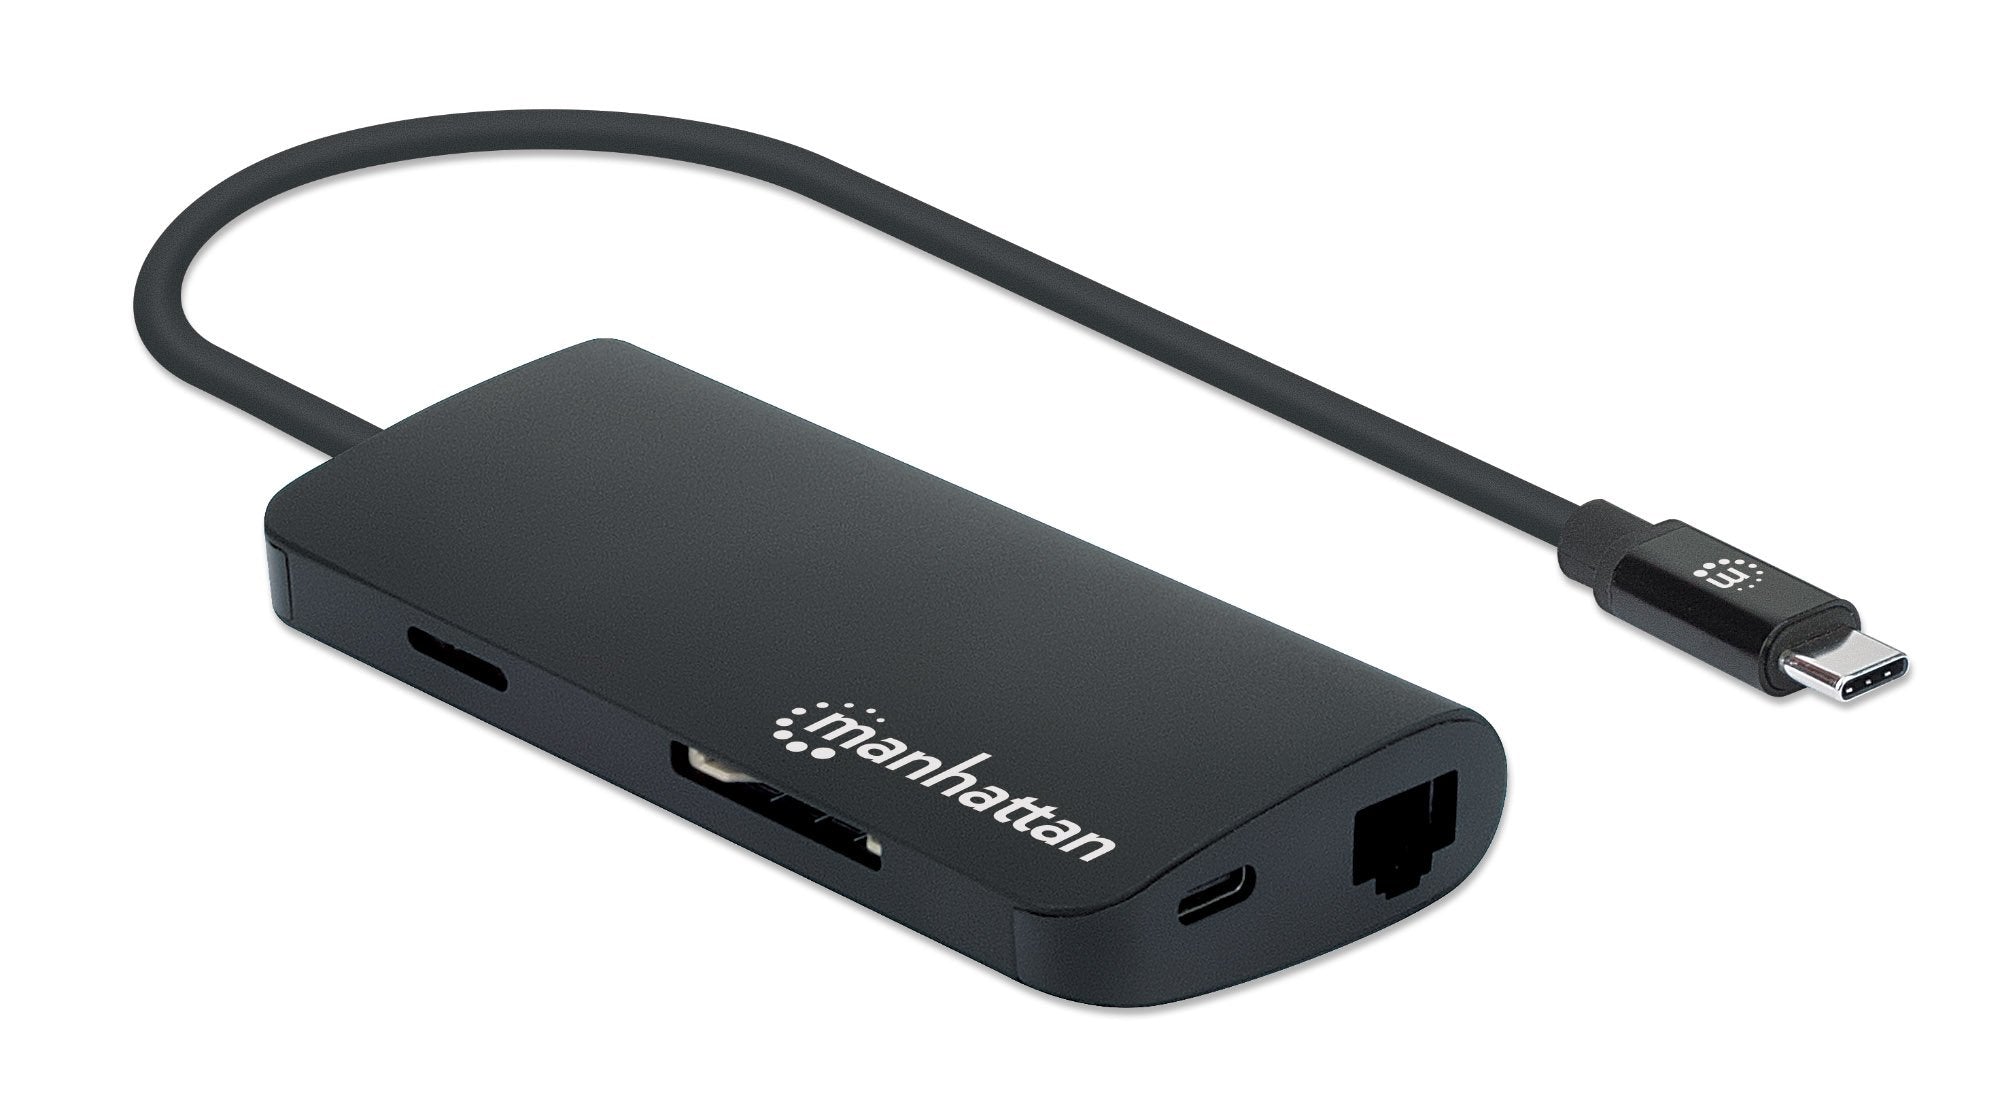 Manhattan USB-C Dock/Hub with Card Reader, Ports (x5): Ethernet, USB-A (3) and USB-C, 5 Gbps (USB 3.2 Gen1 aka USB 3.0), With Power Delivery (100W) to USB-C Port (Note additional USB-C wall charger and USB-C cable needed), Aluminium, Black, Three Year War